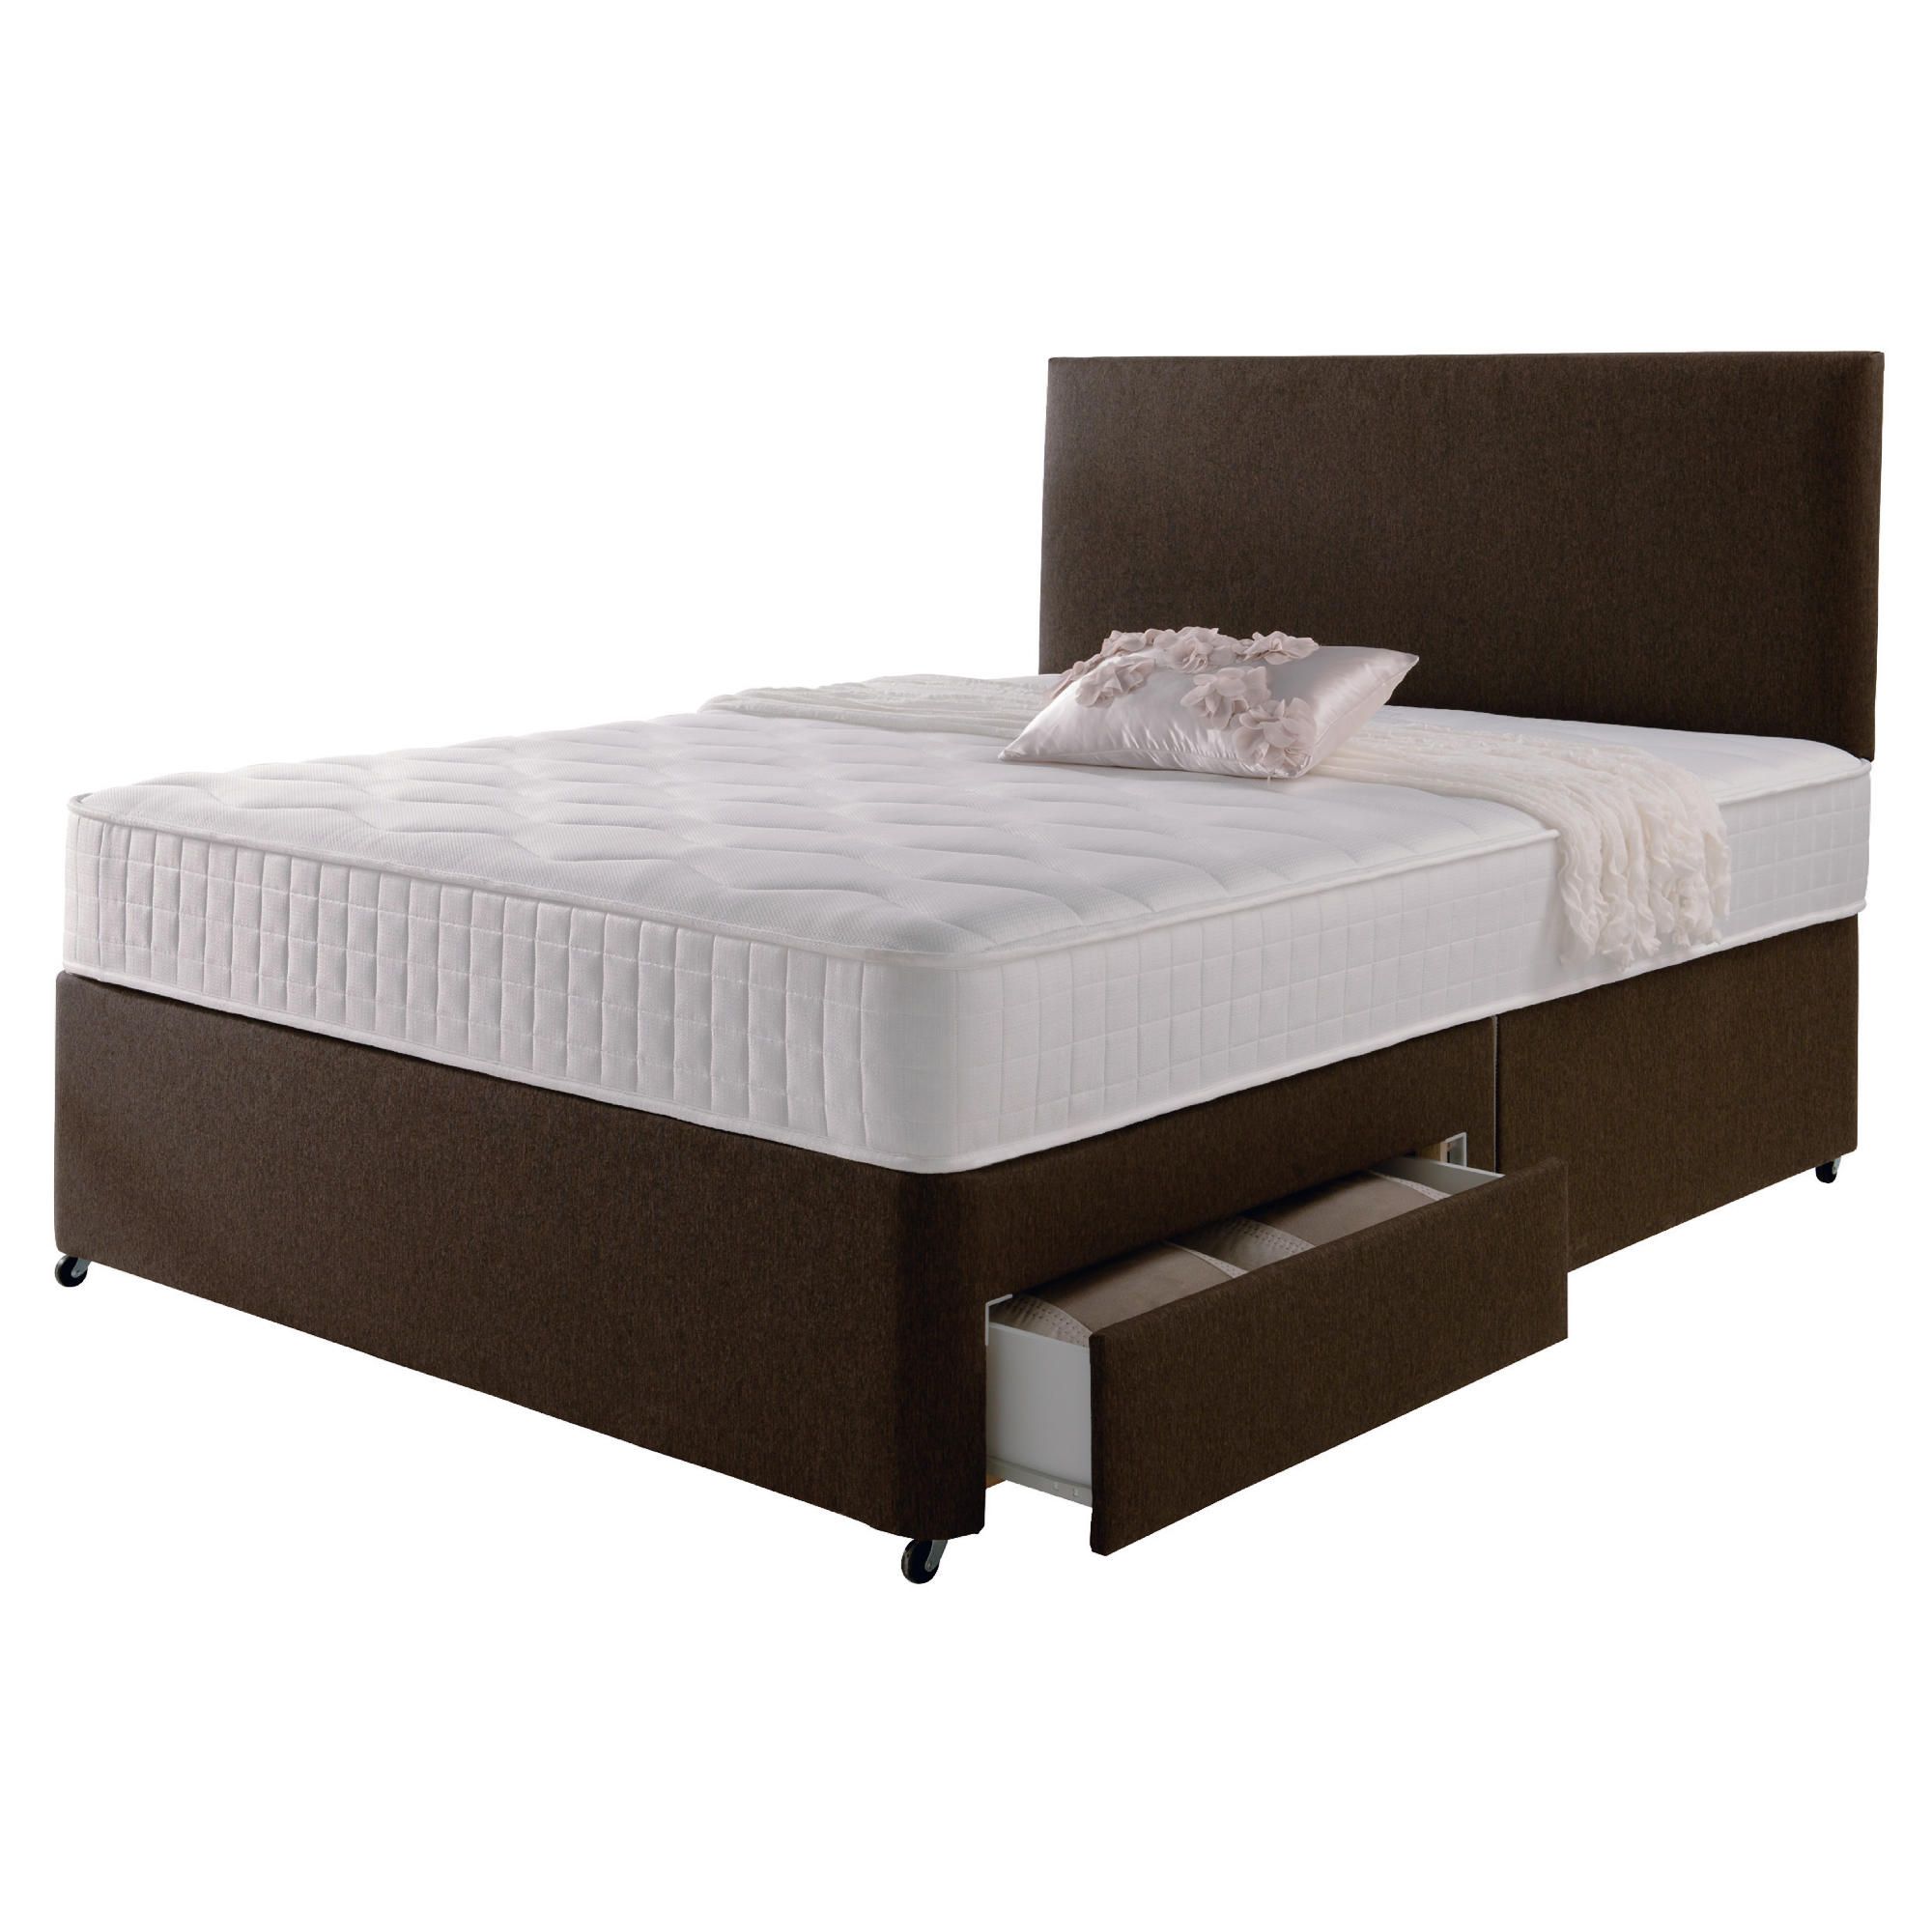 Rest Assured Memory 4 Drawer Double Divan and Headboard Chestnut at Tesco Direct